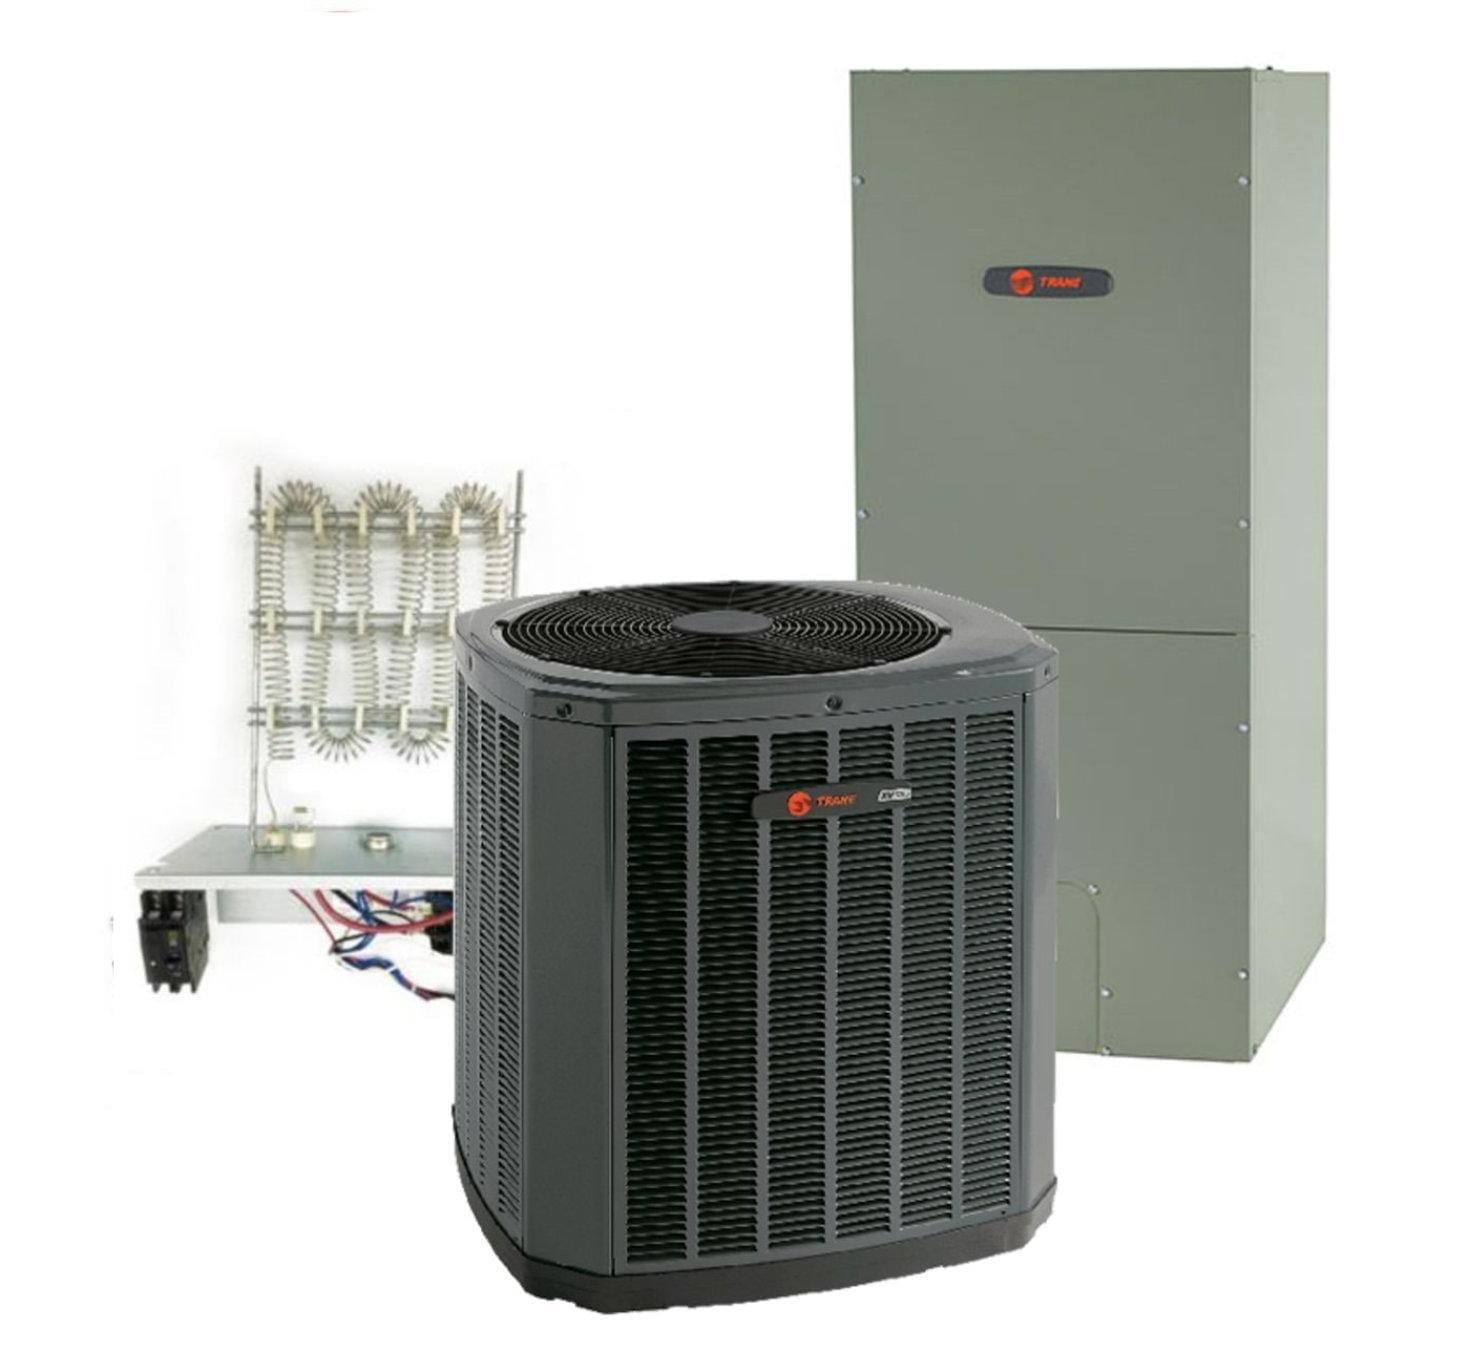 Trane 2.5 Ton 14 SEER Single Stage Heat Pump System Includes Installation